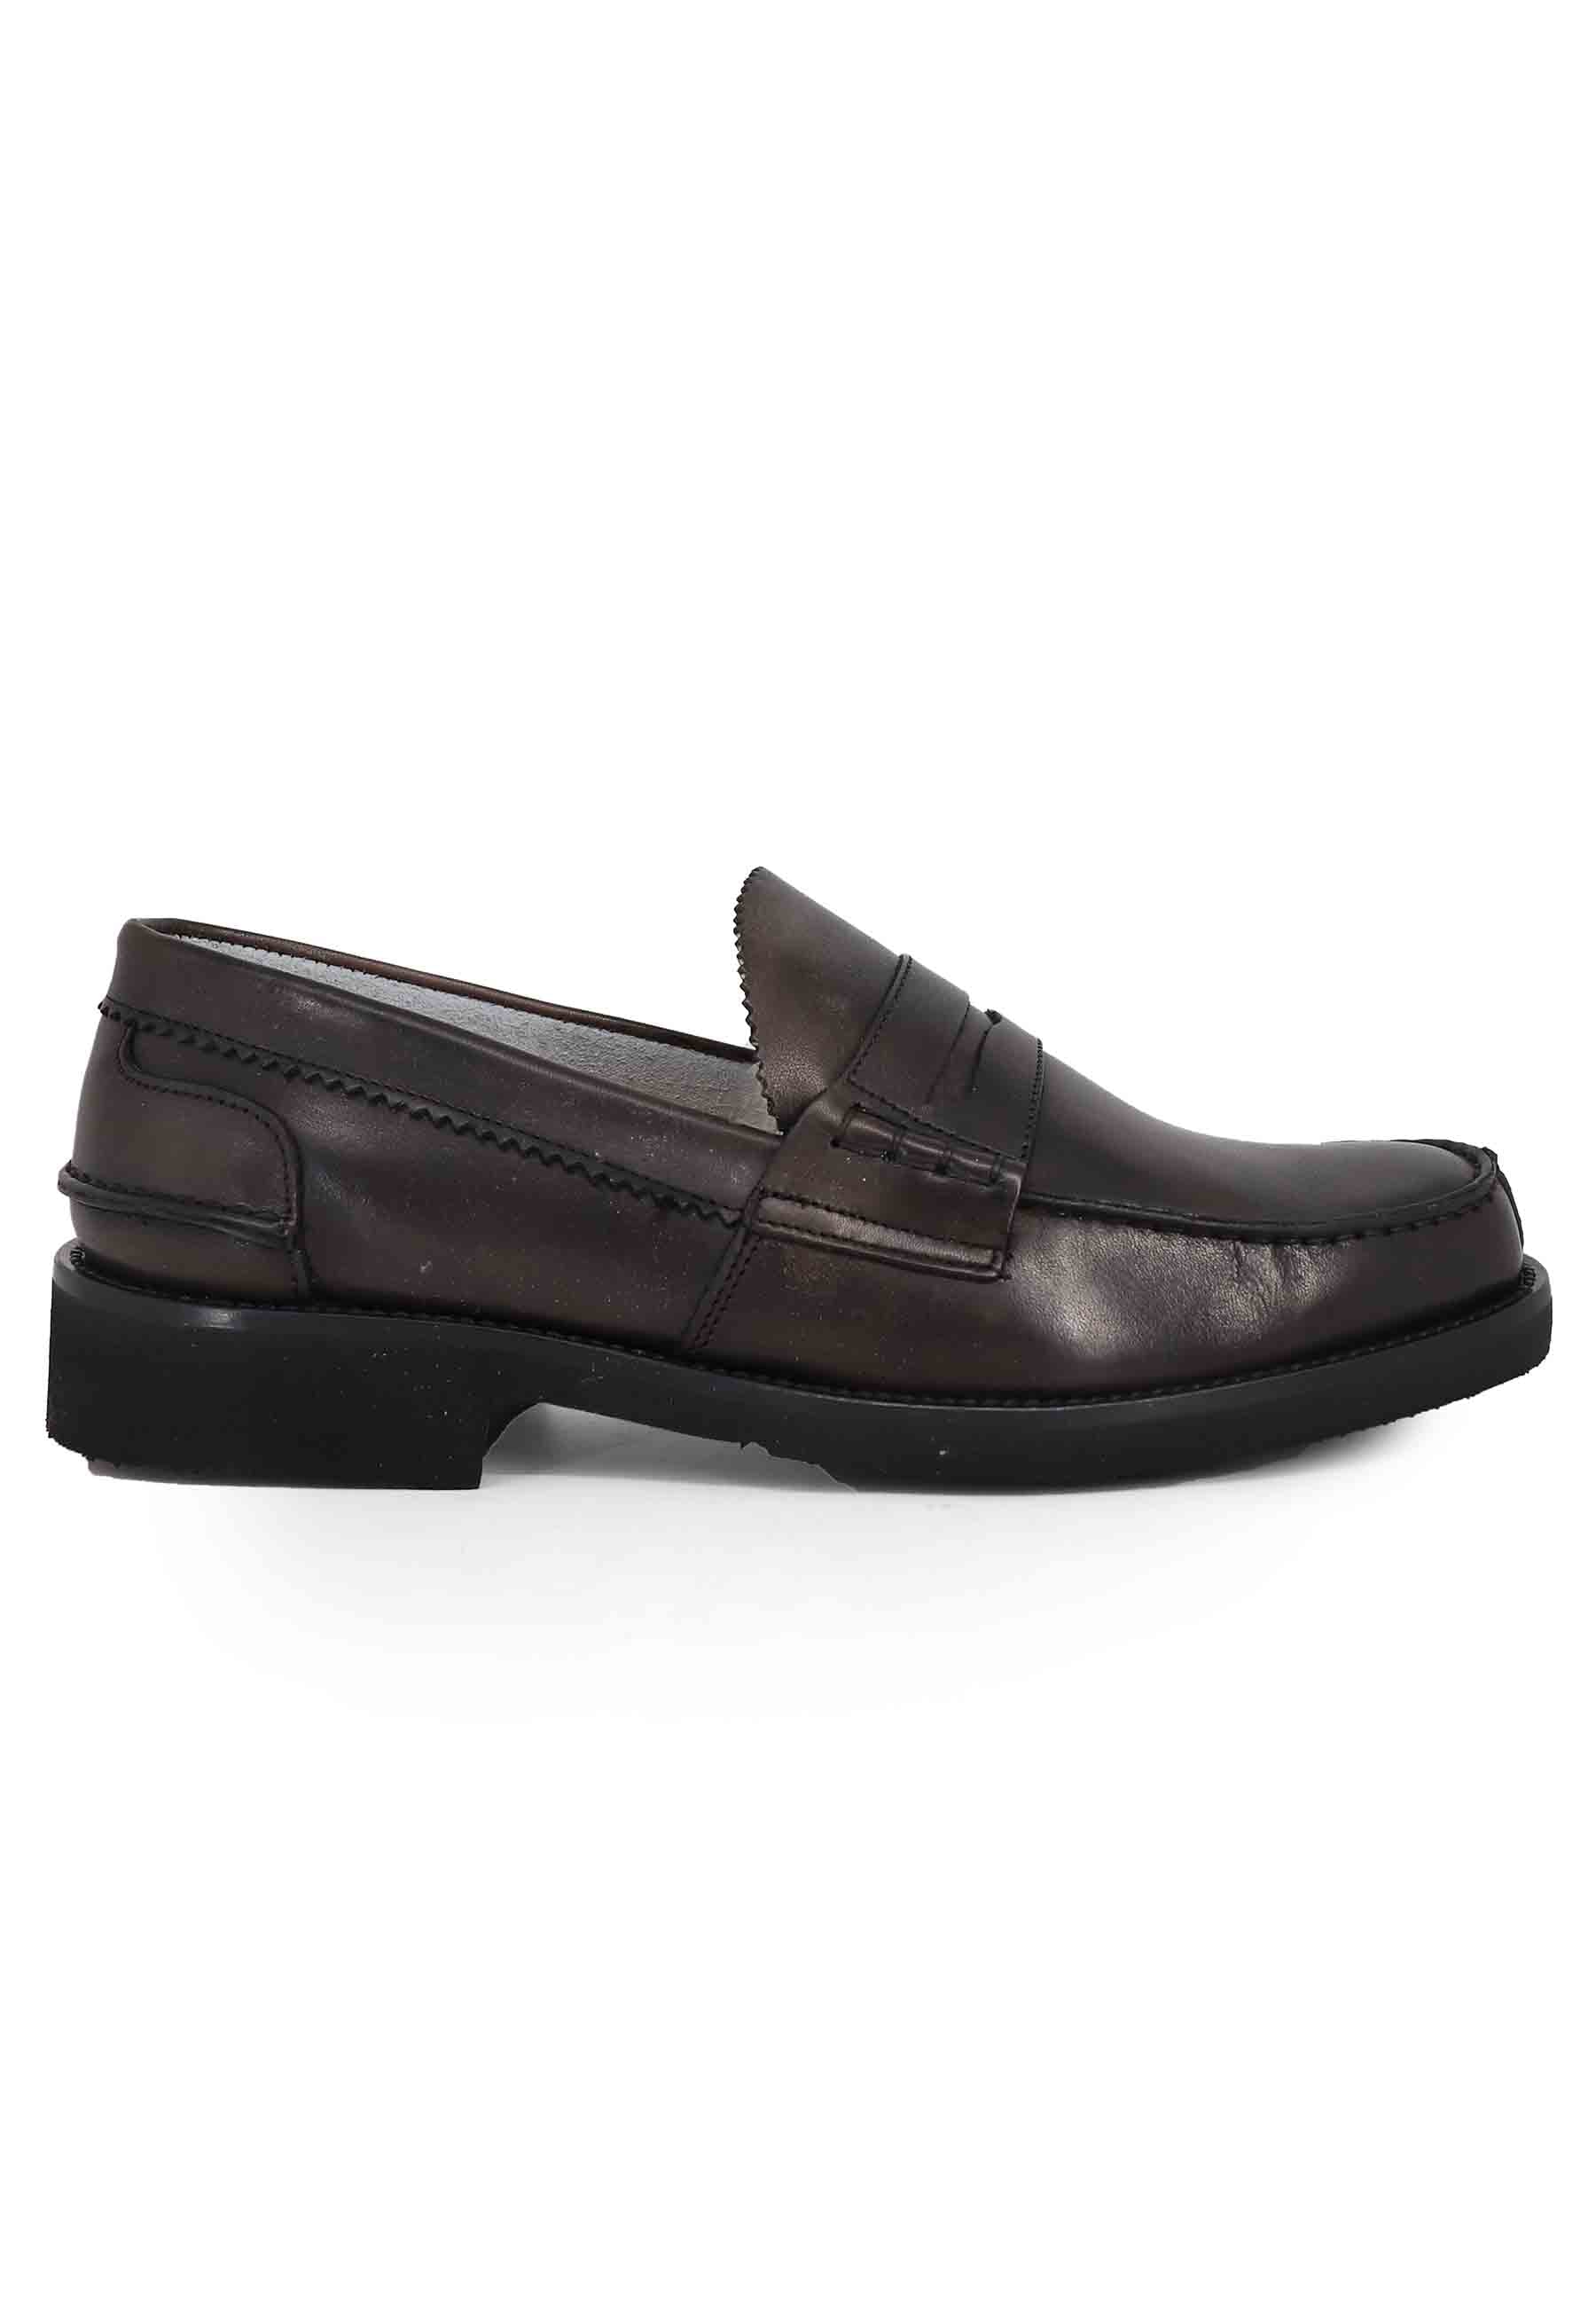 Men's moccasins in dark brown leather with extra light rubber sole